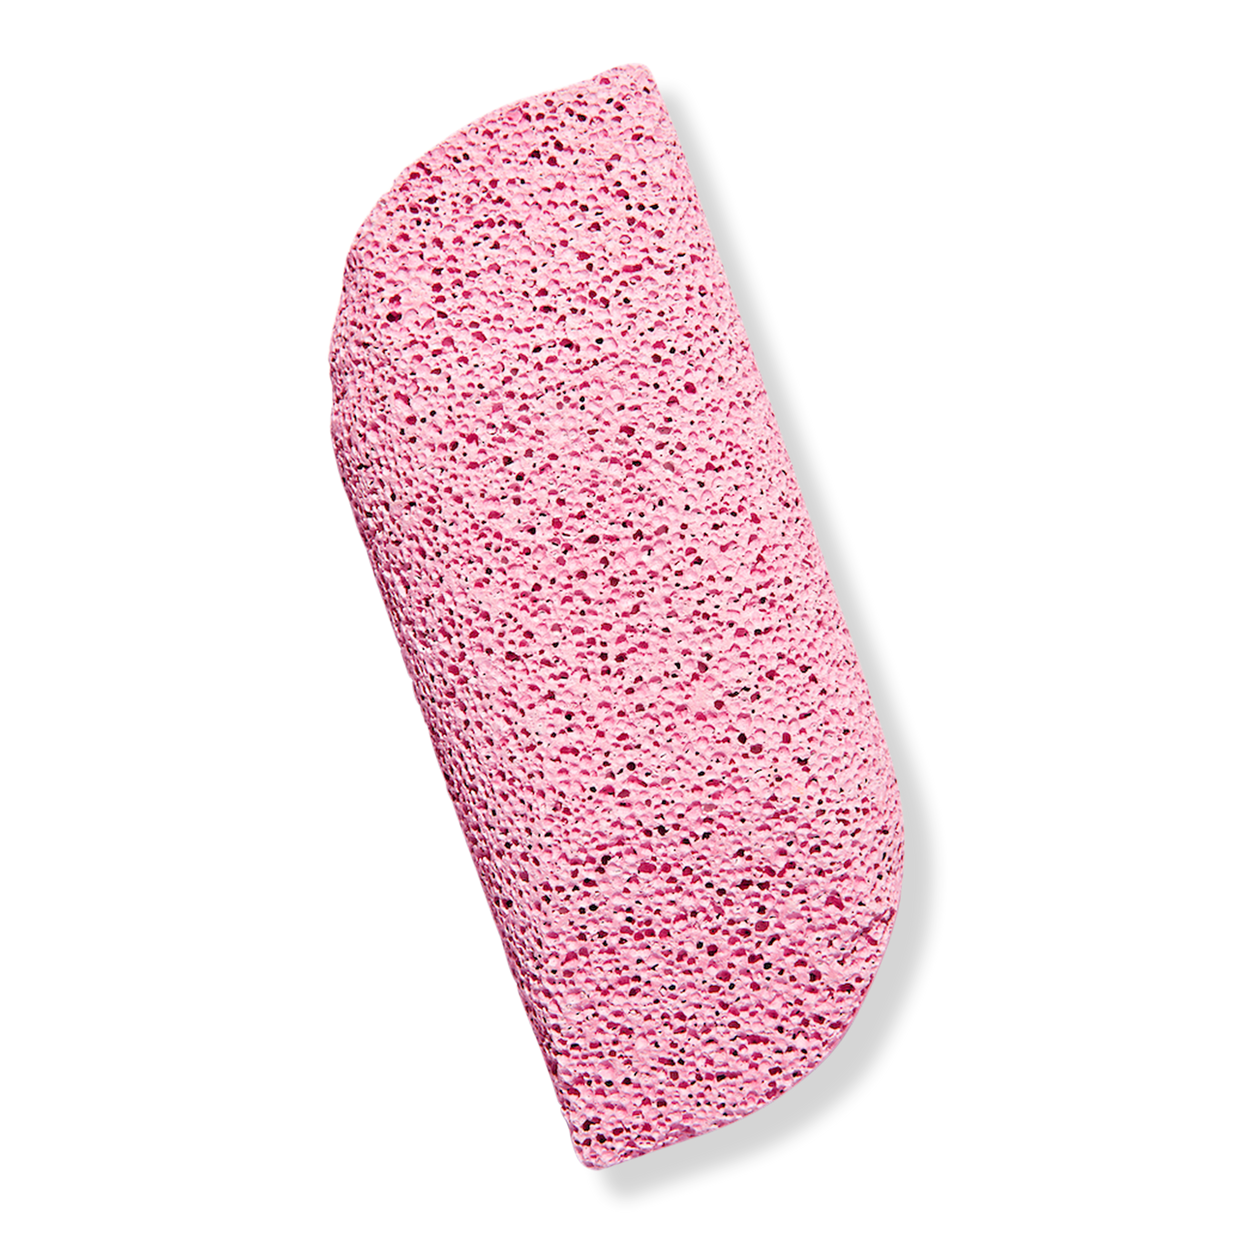 How To Use A Pumice Stone For Beautiful Feet: Best Techniques And Benefits